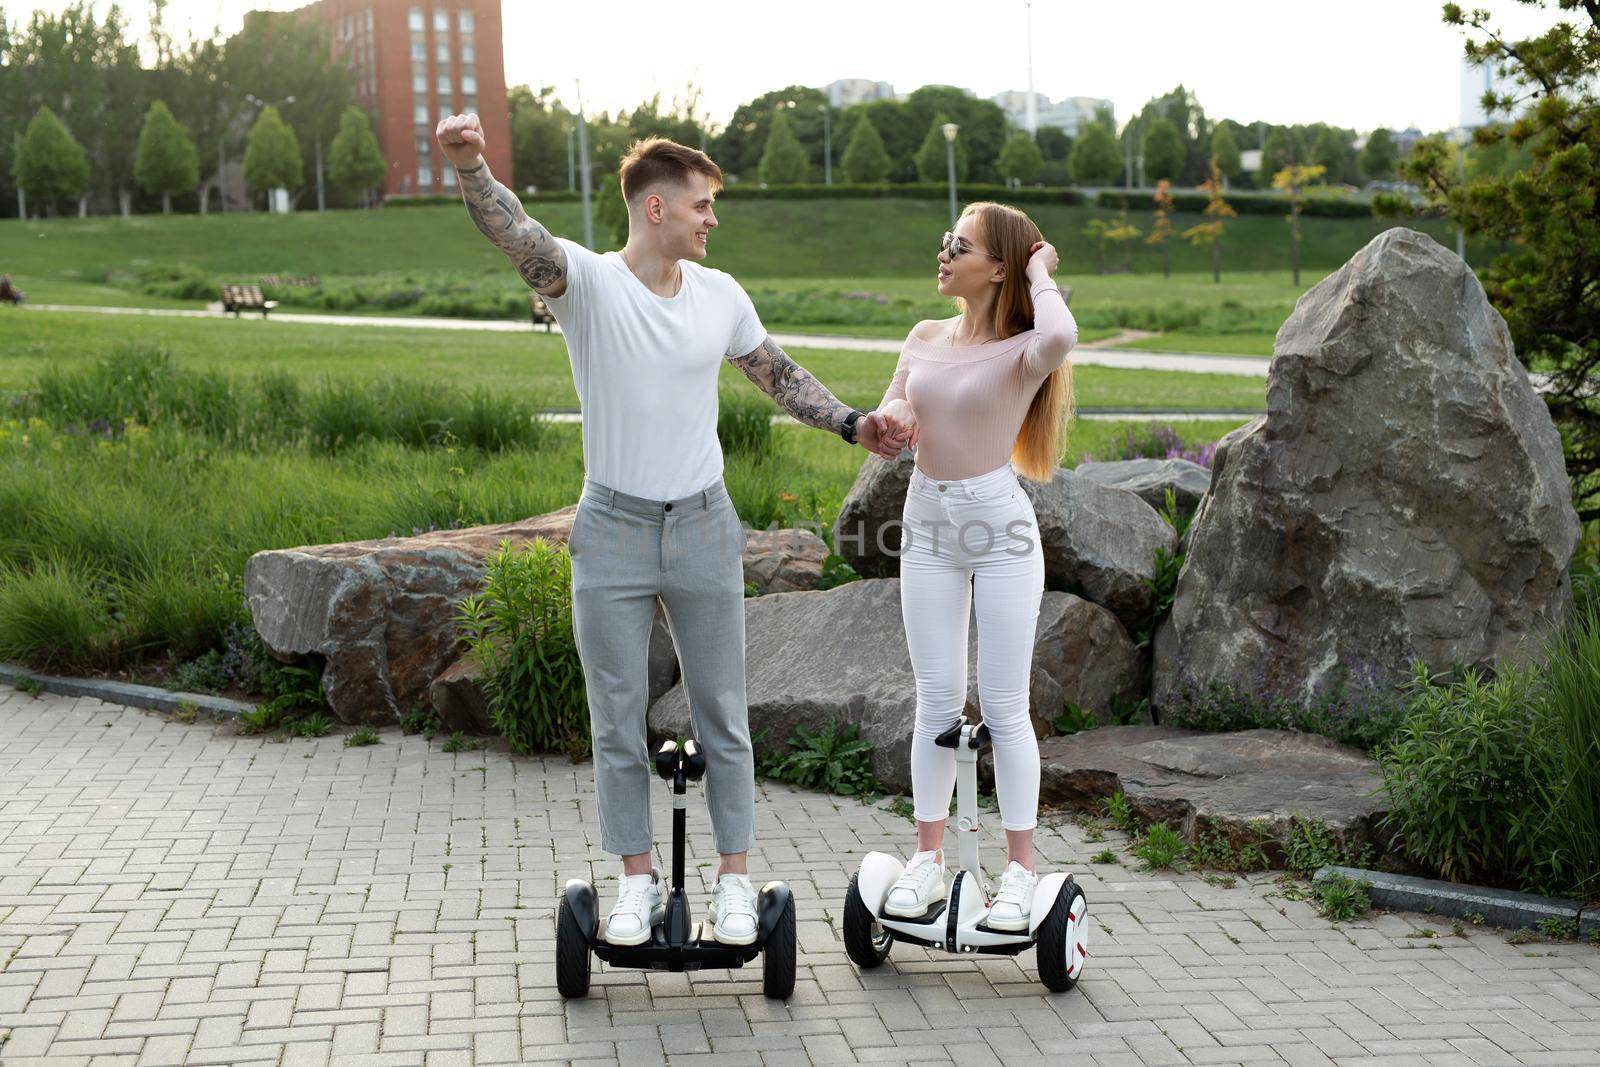 Young man and woman riding on the hoverboard in the park. by StudioPeace